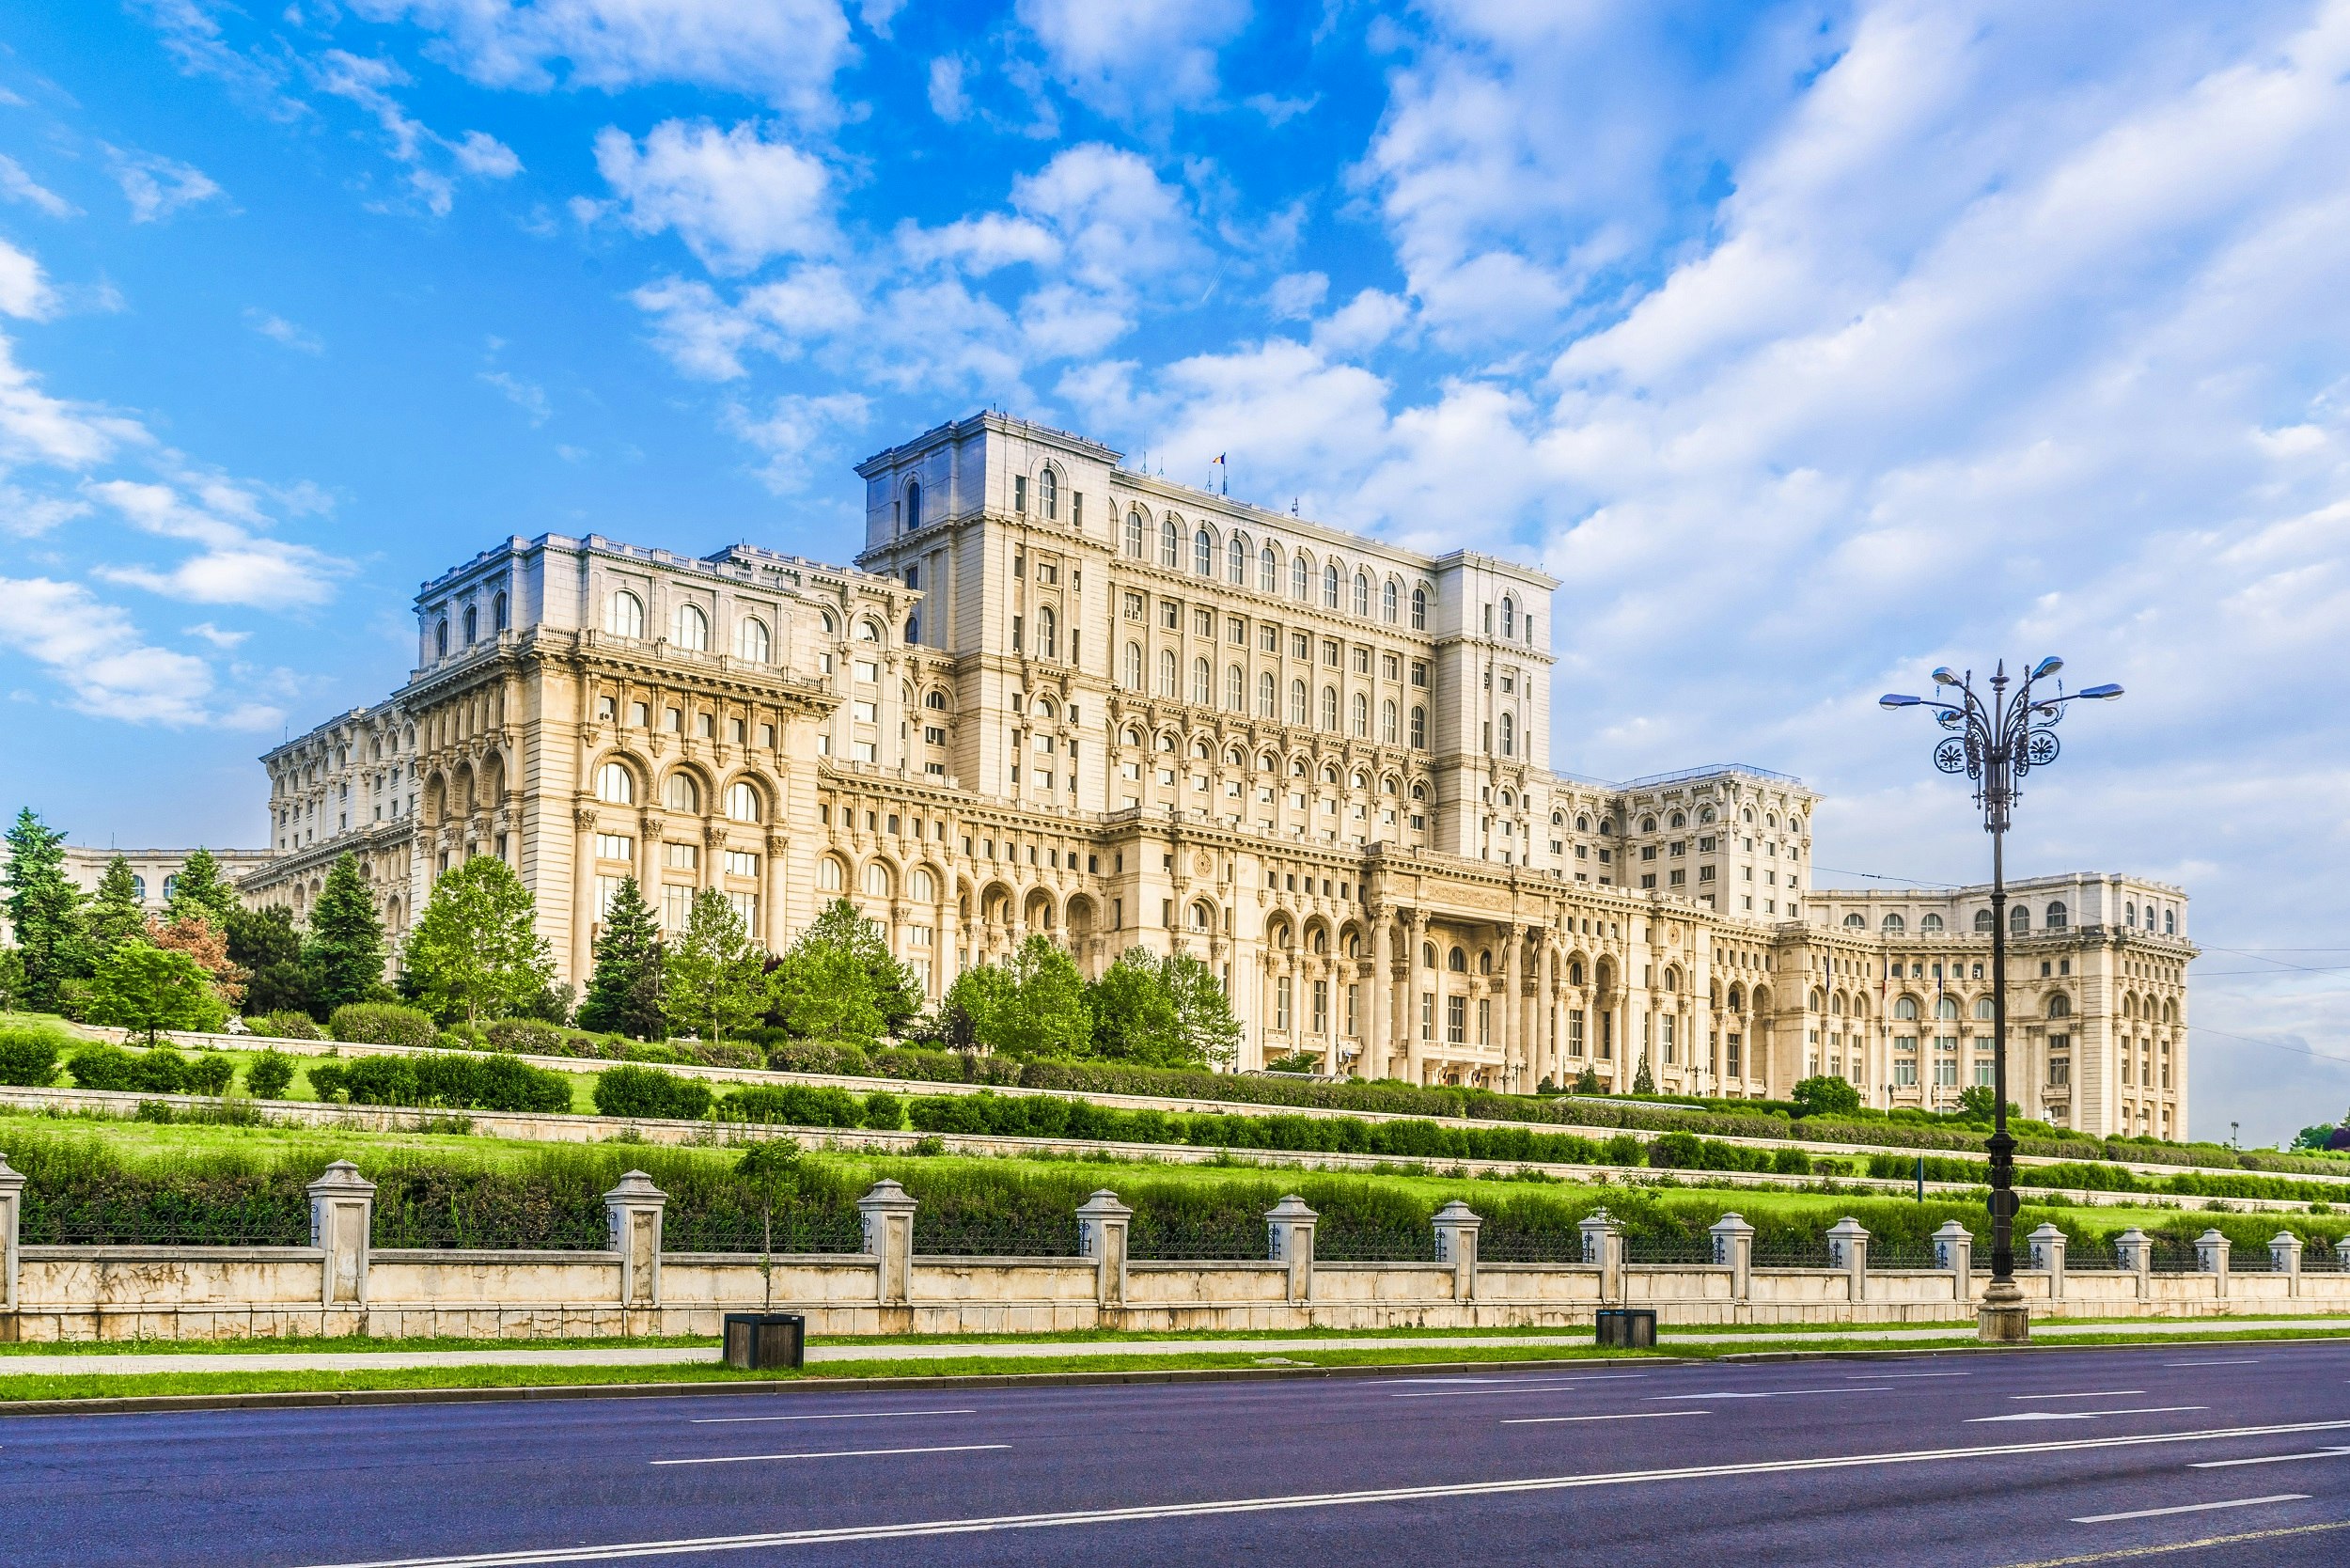 A huge marble building with several tiers and hundreds of windows in landscaped gardens.